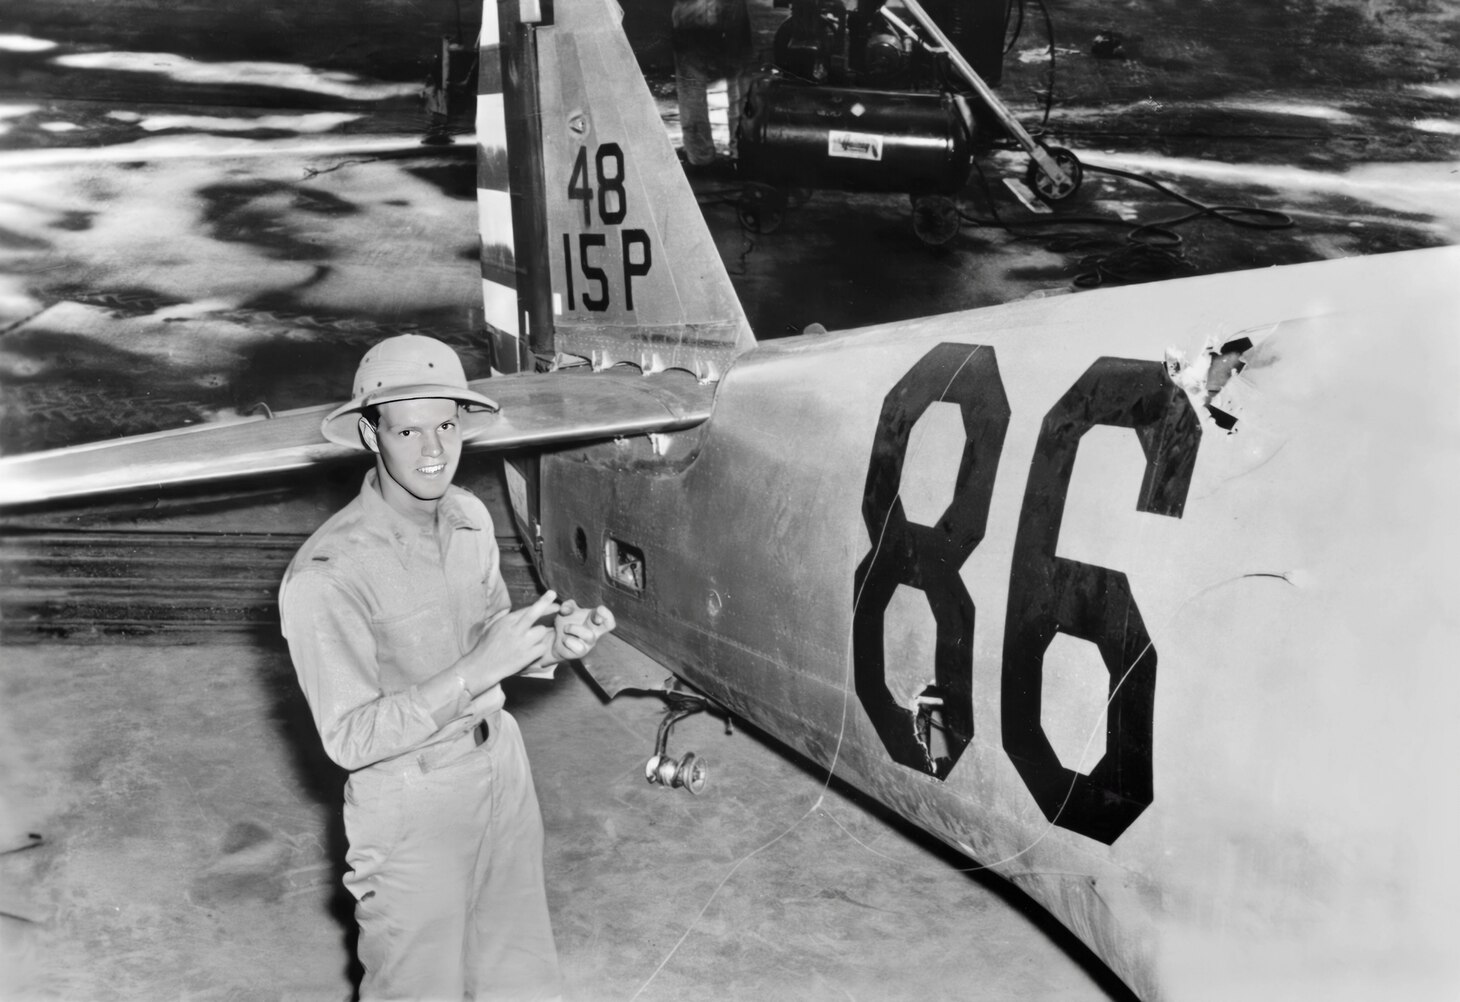 2nd Lt. Philip M. Rasmussen was part of Lt. Sanders’ formation that attacked Japanese Zeros in a major dogfight that showed that American forces were finally able to confront the raiders in force. In this photo, he is pointing to various bullet holes in his P-36A from the Zeros. Some of the holes are from the Zeros’ wing-mounted 20mm cannon. Rasmussen also received the Silver Star. He and Sanders each claimed one Zero.